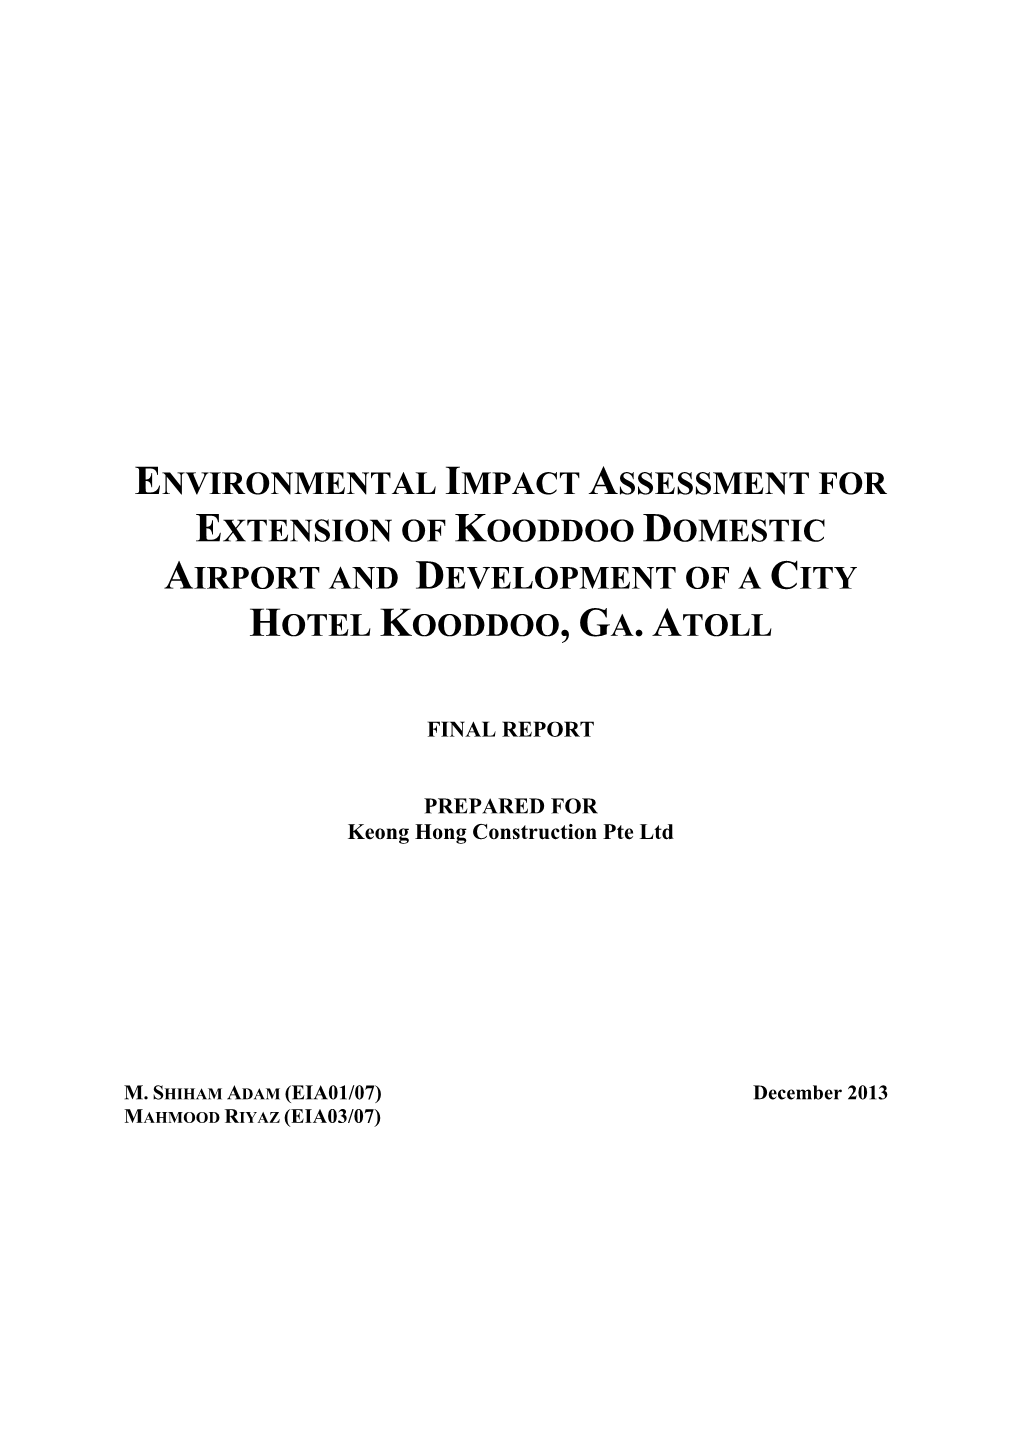 Environmental Impact Assessment for Extension of Kooddoo Domestic Airport and Development of a City Hotel Kooddoo, Ga. Atoll